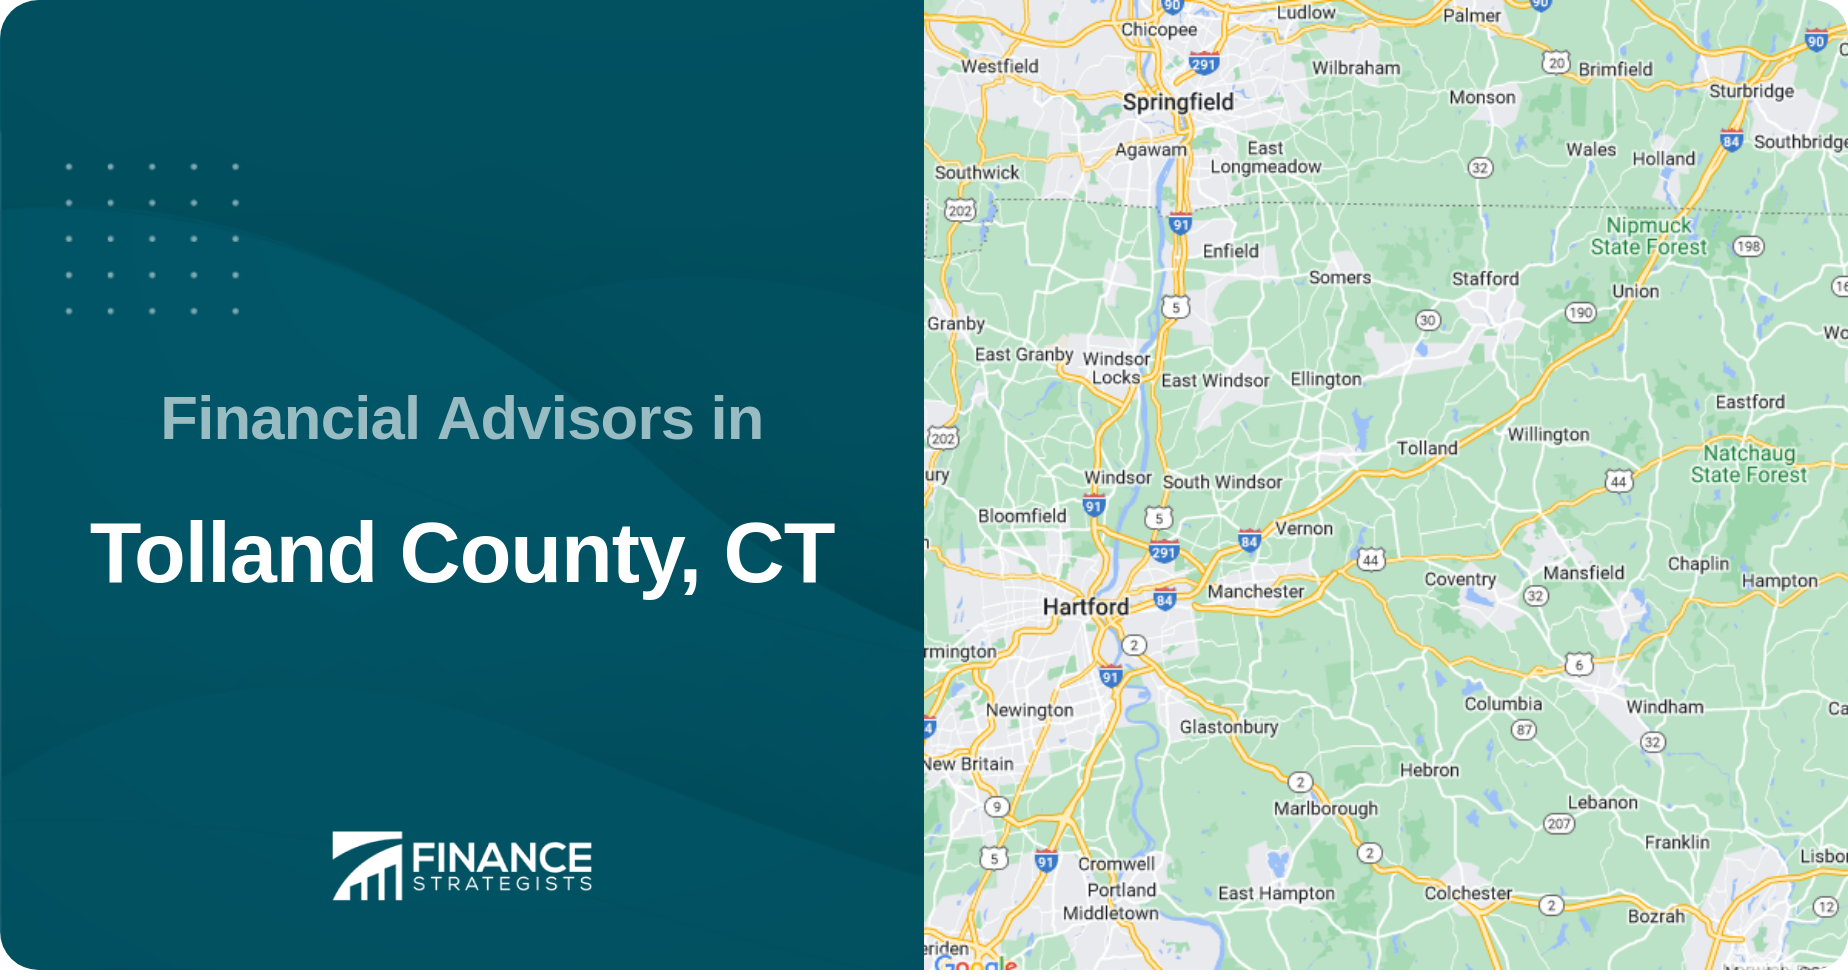 Financial Advisors in Tolland County, CT